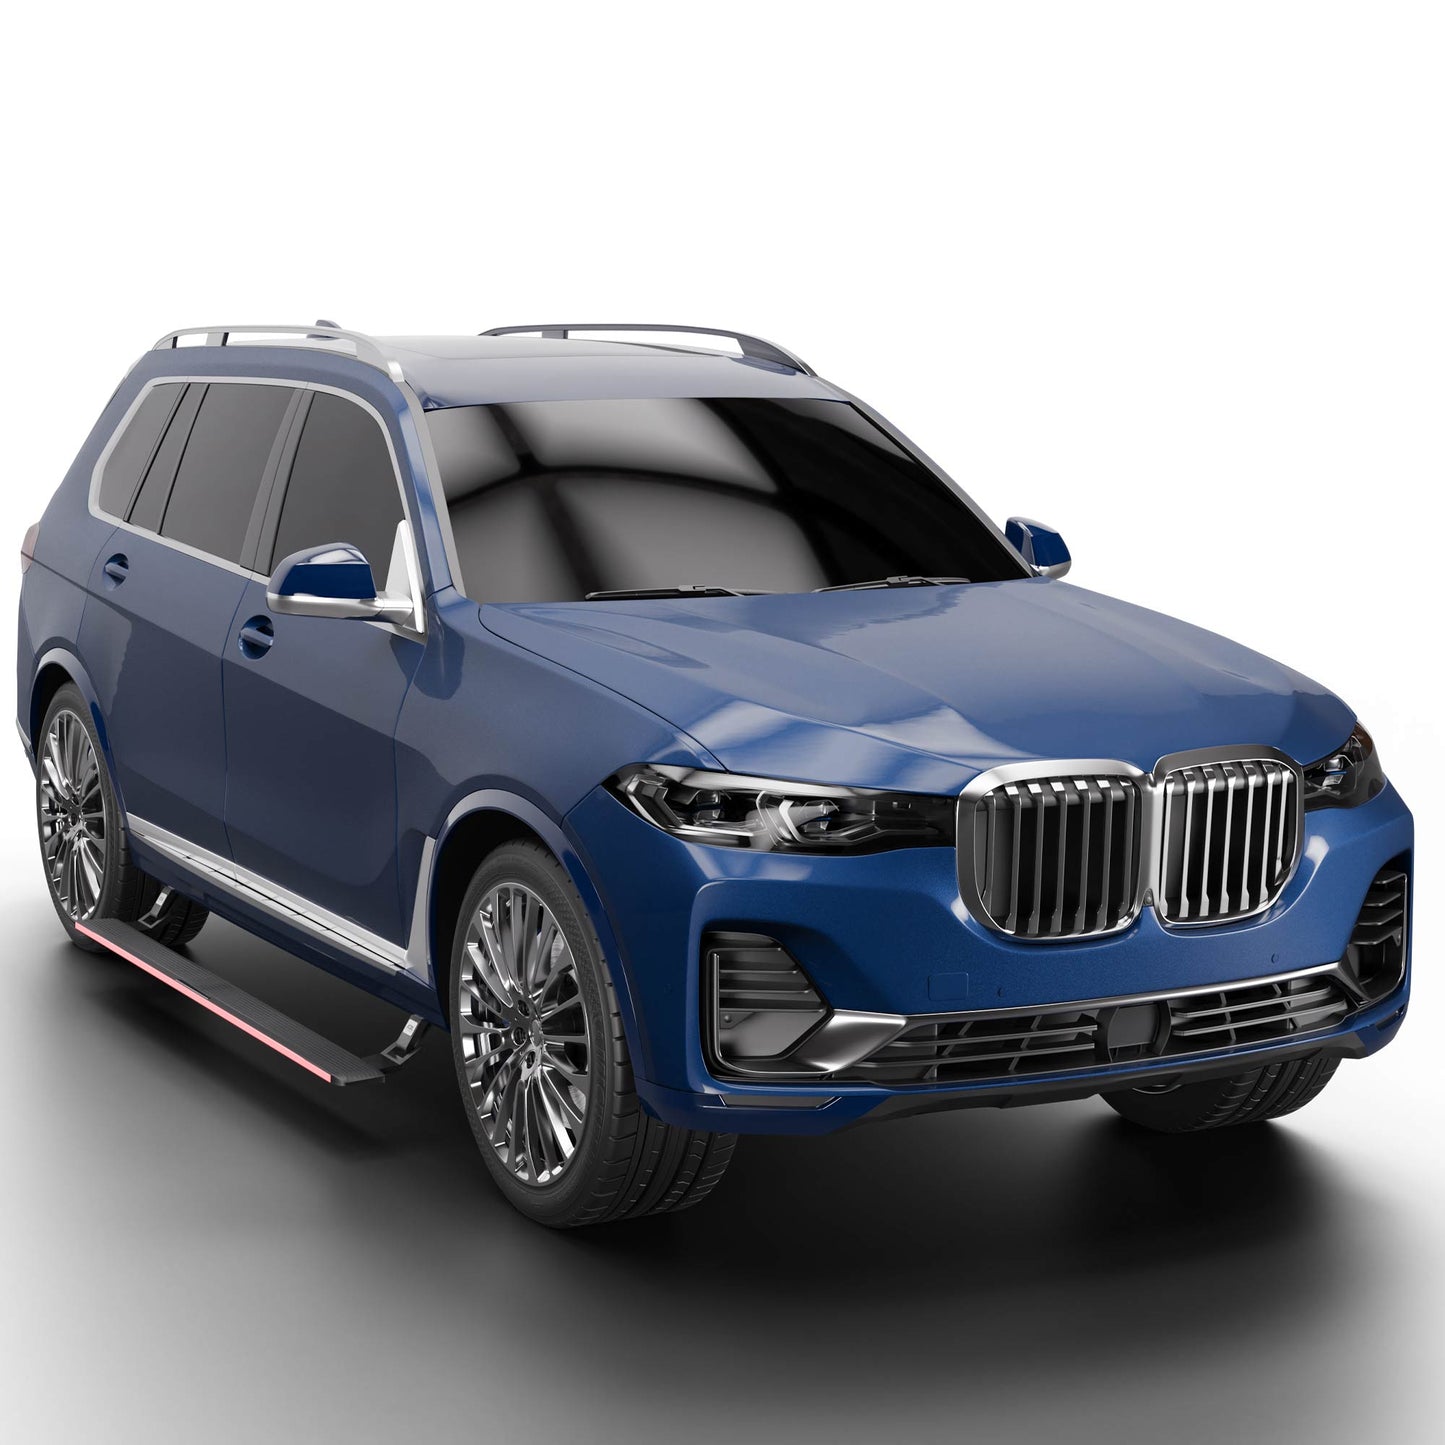 JCBL Accessories Automatic Door Side E-Step for SUVs (BMW X7 19+ E-Side Step)